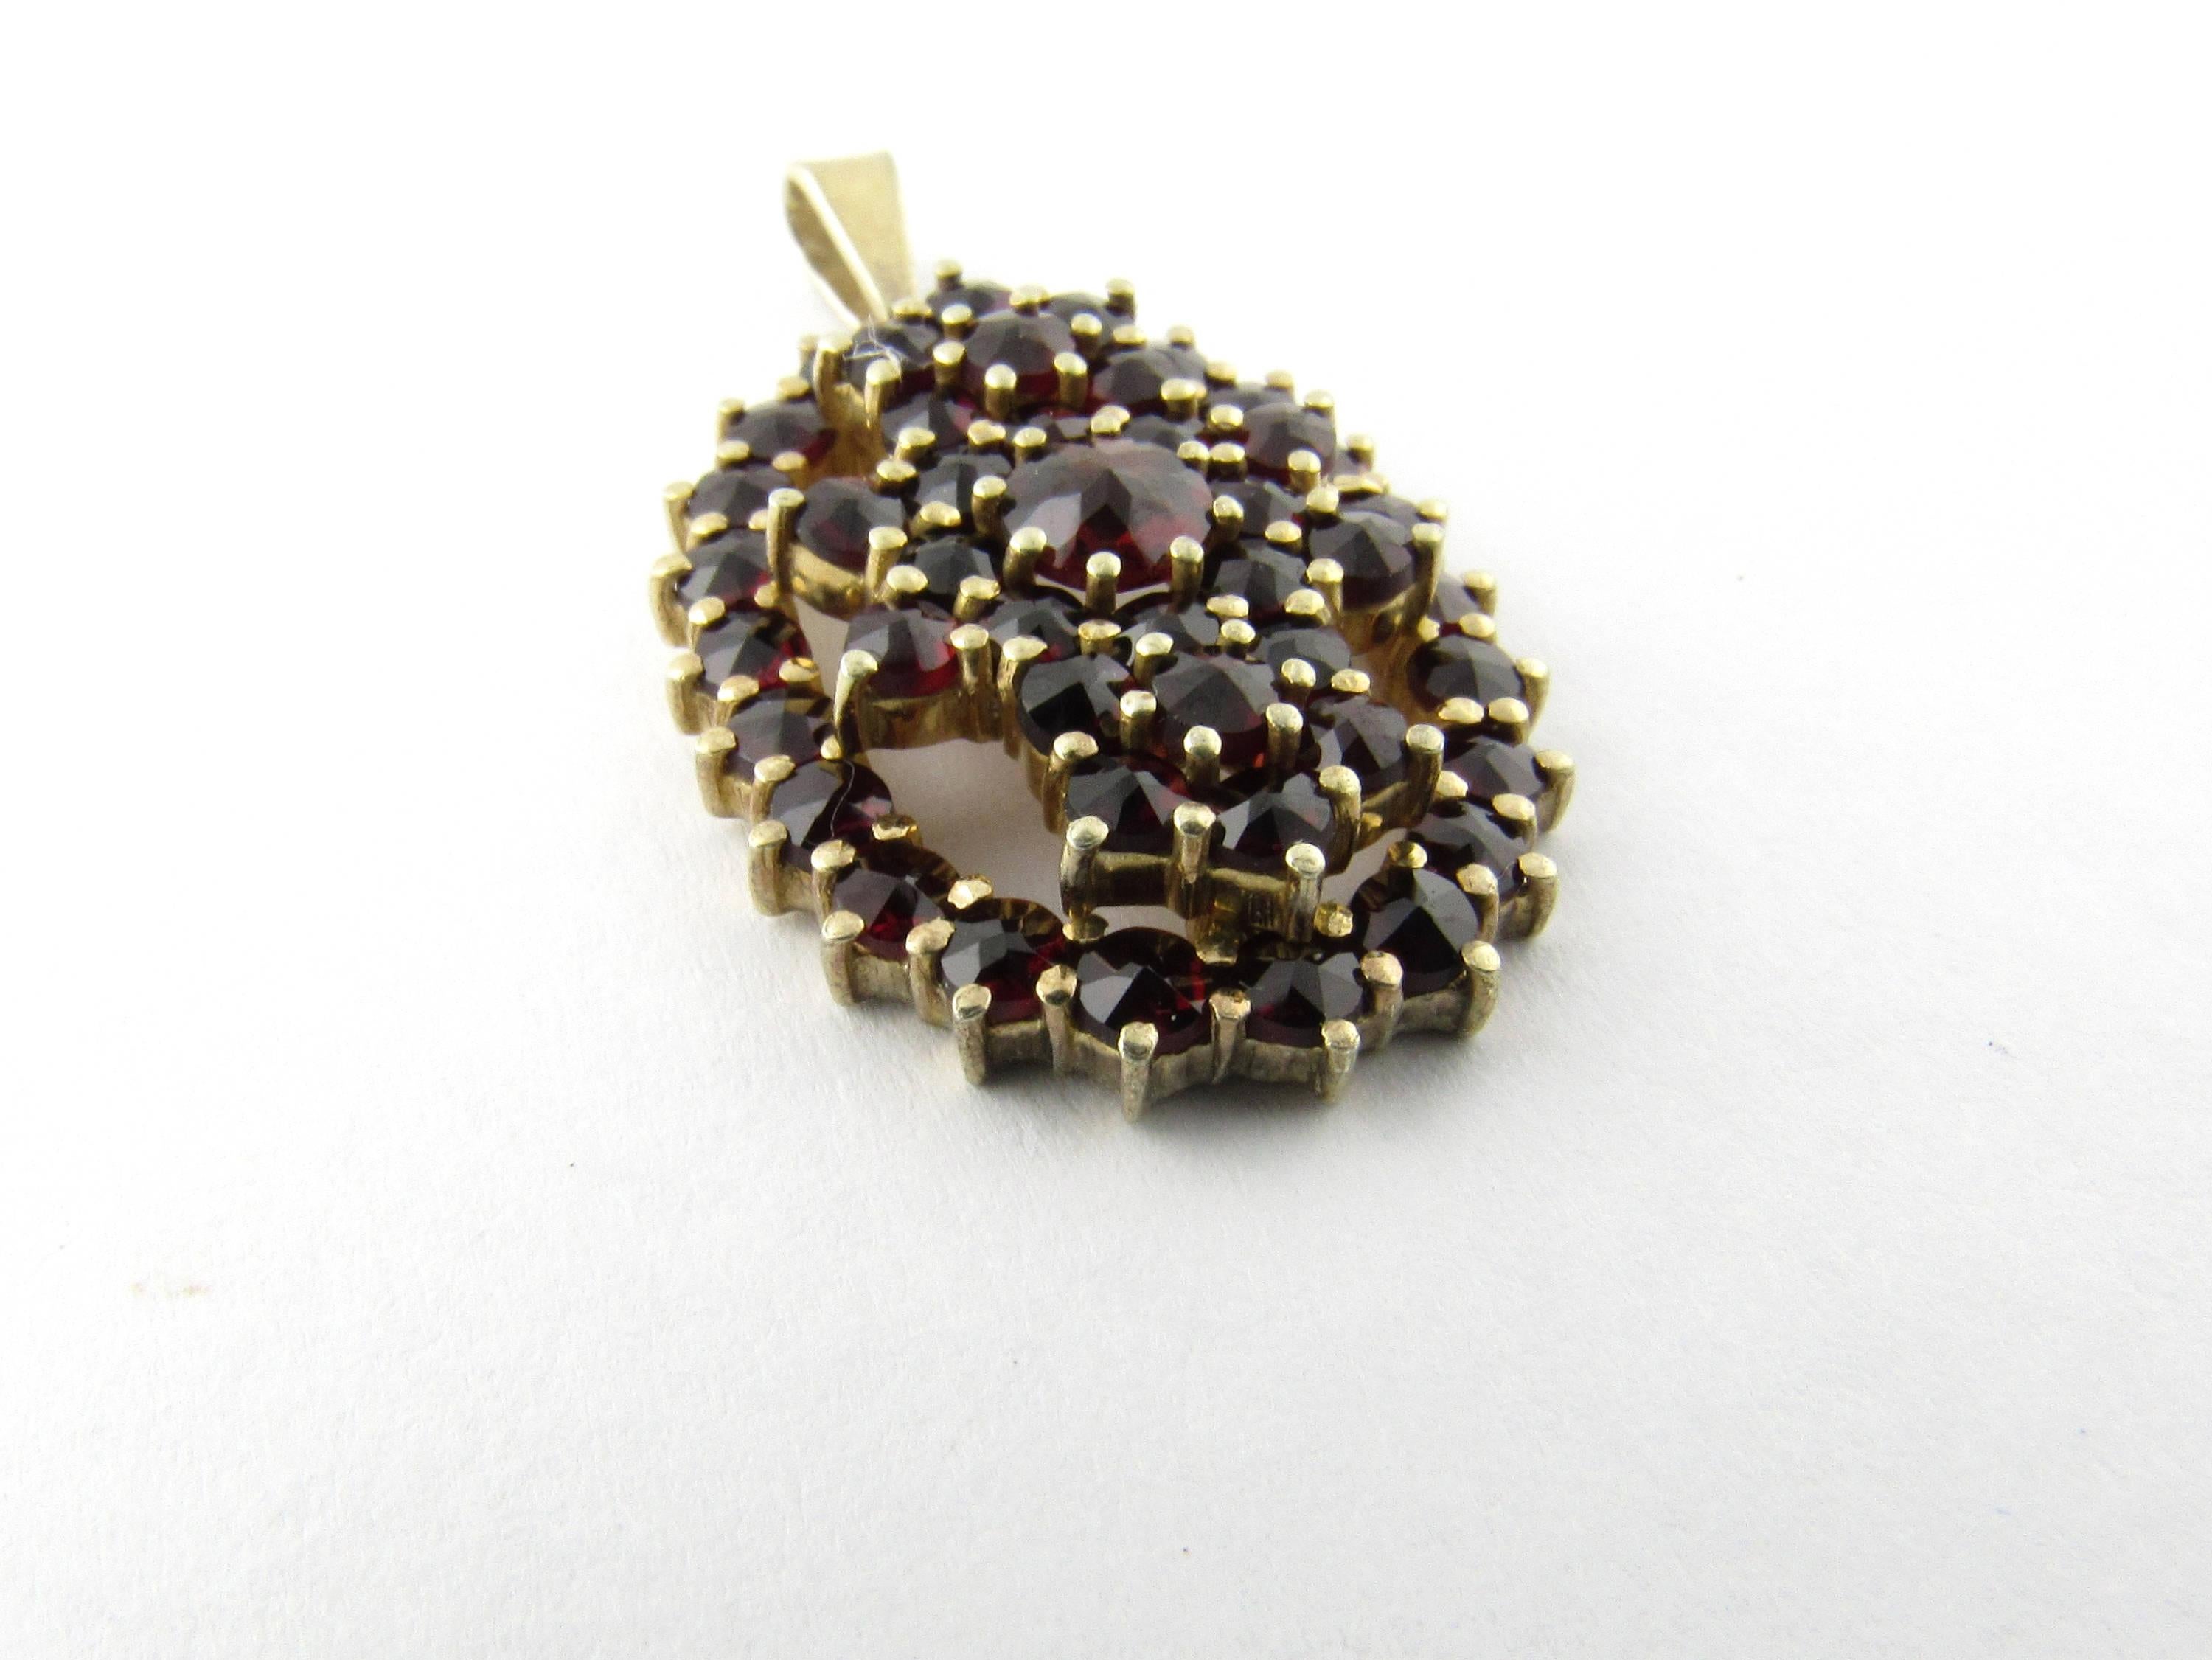 Antique Victorian 900 Silver Bohemian Garnet Pendant-

This lovely pendant features Bohemian rose cut garnets set in stunning gold wash 900 silver.

Size: 27 mm x 18 mm (actual pendant)

Weight: 2.4 dwt. / 3.8 gr.

Hallmark: 900

Very good